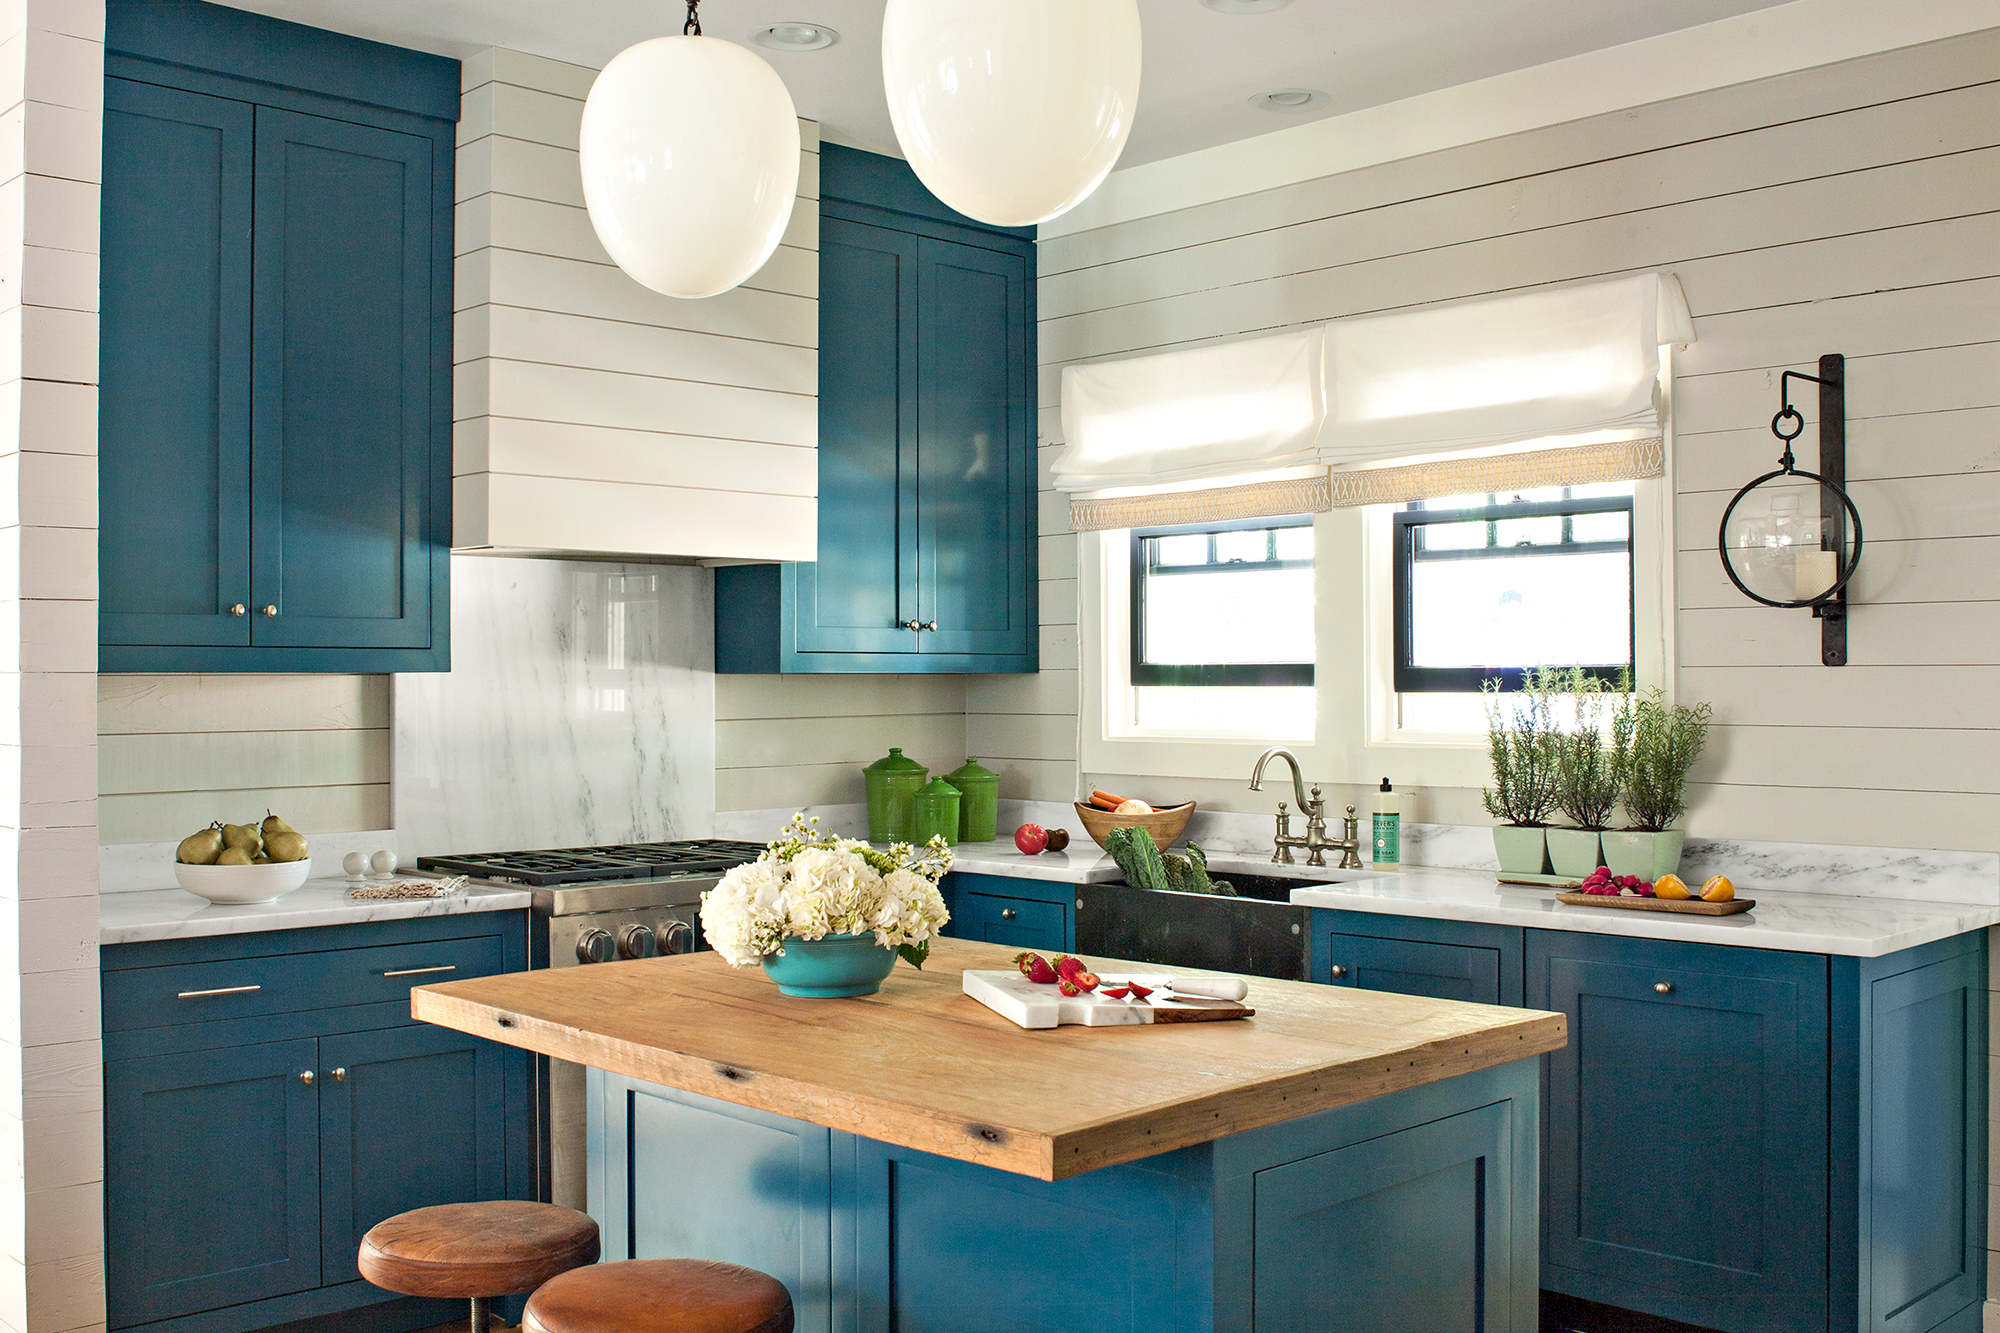 Refreshing kitchen with blue replacement kitchen cabinet doors.